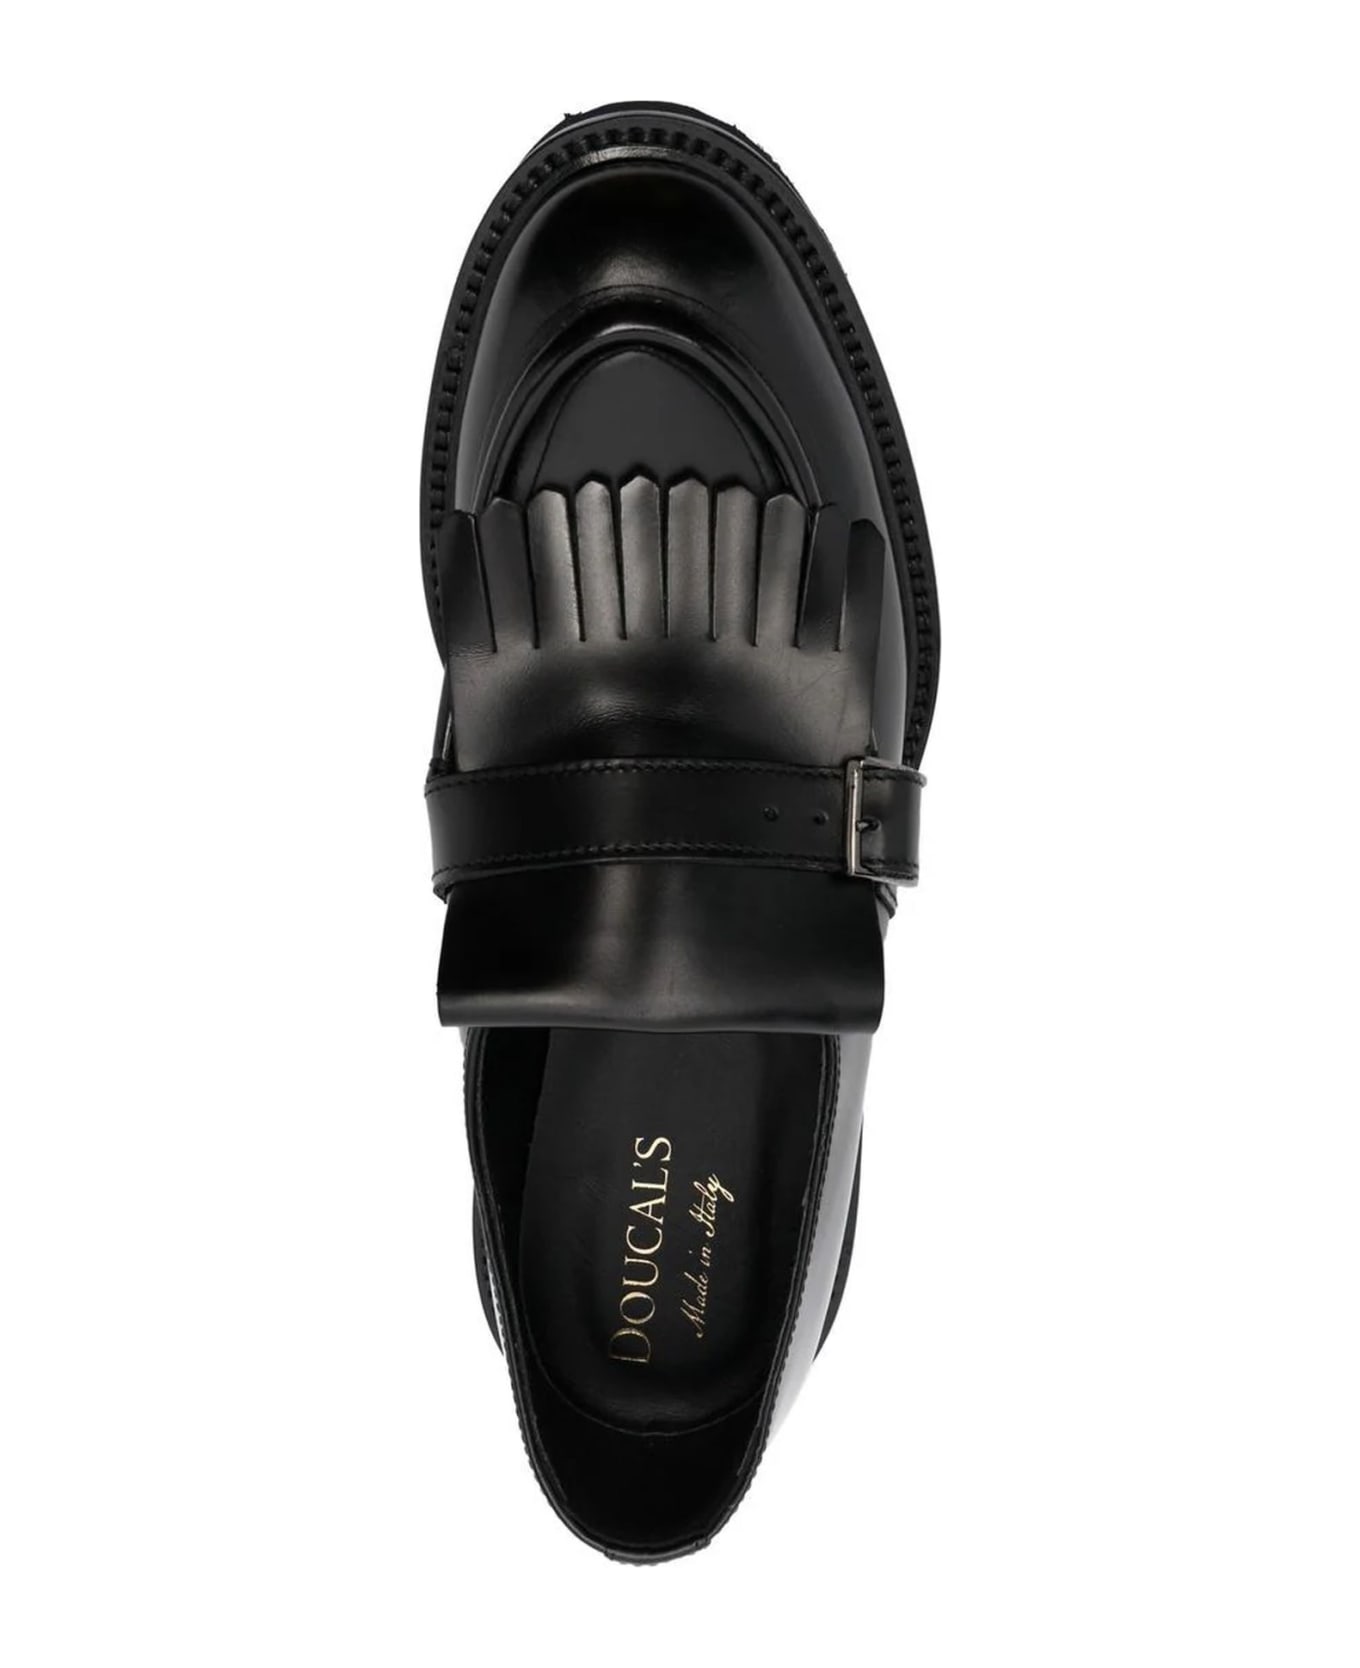 Doucal's Black Calf Leather Loafer - Nero